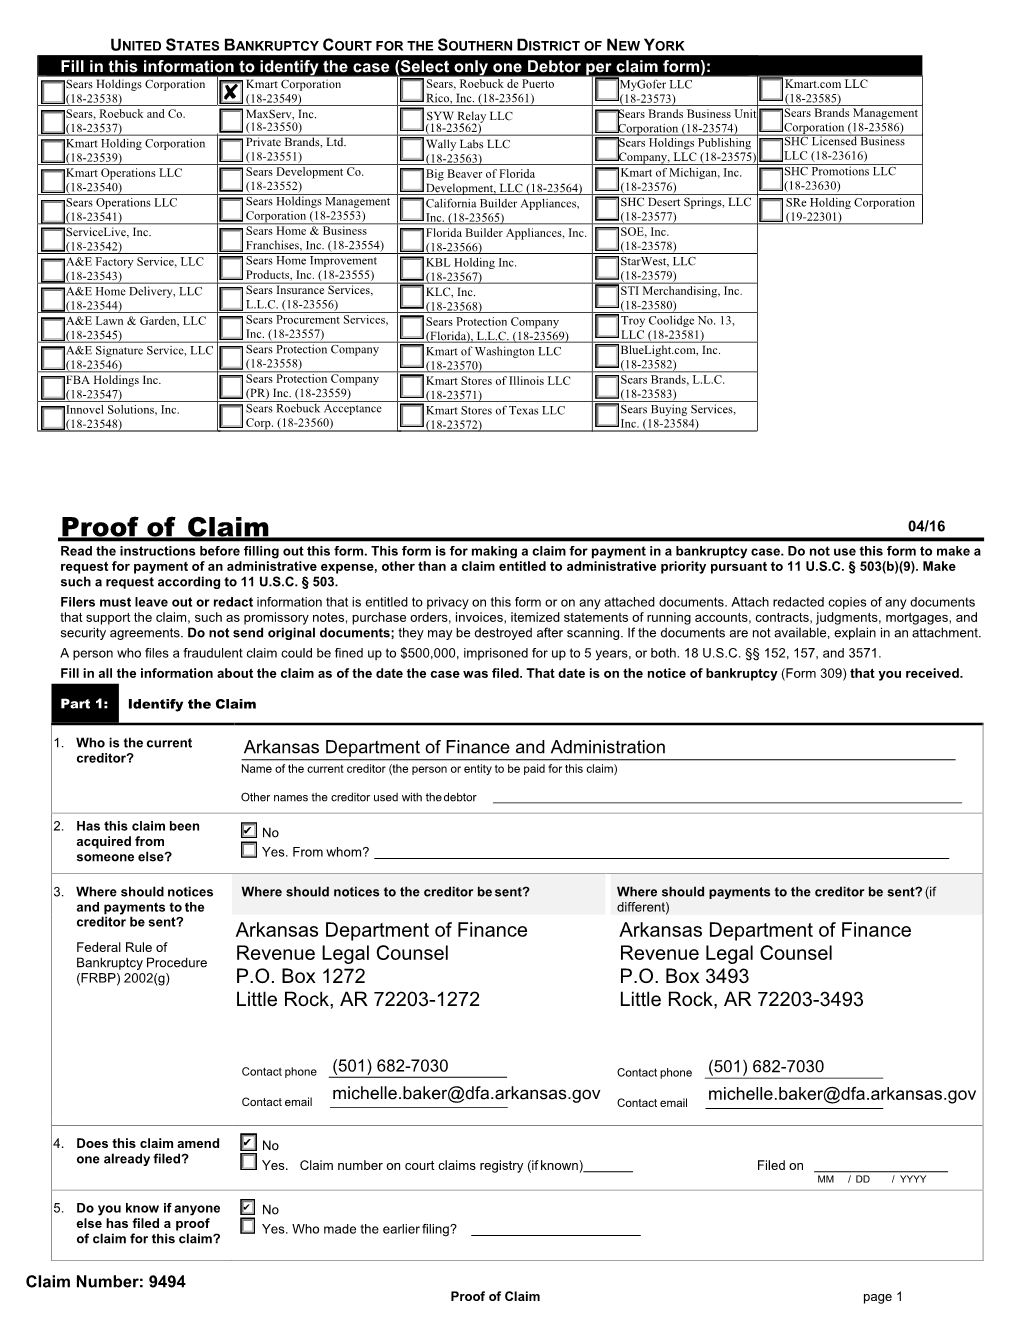 Proof of Claim 04/16 Read the Instructions Before Filling out This Form